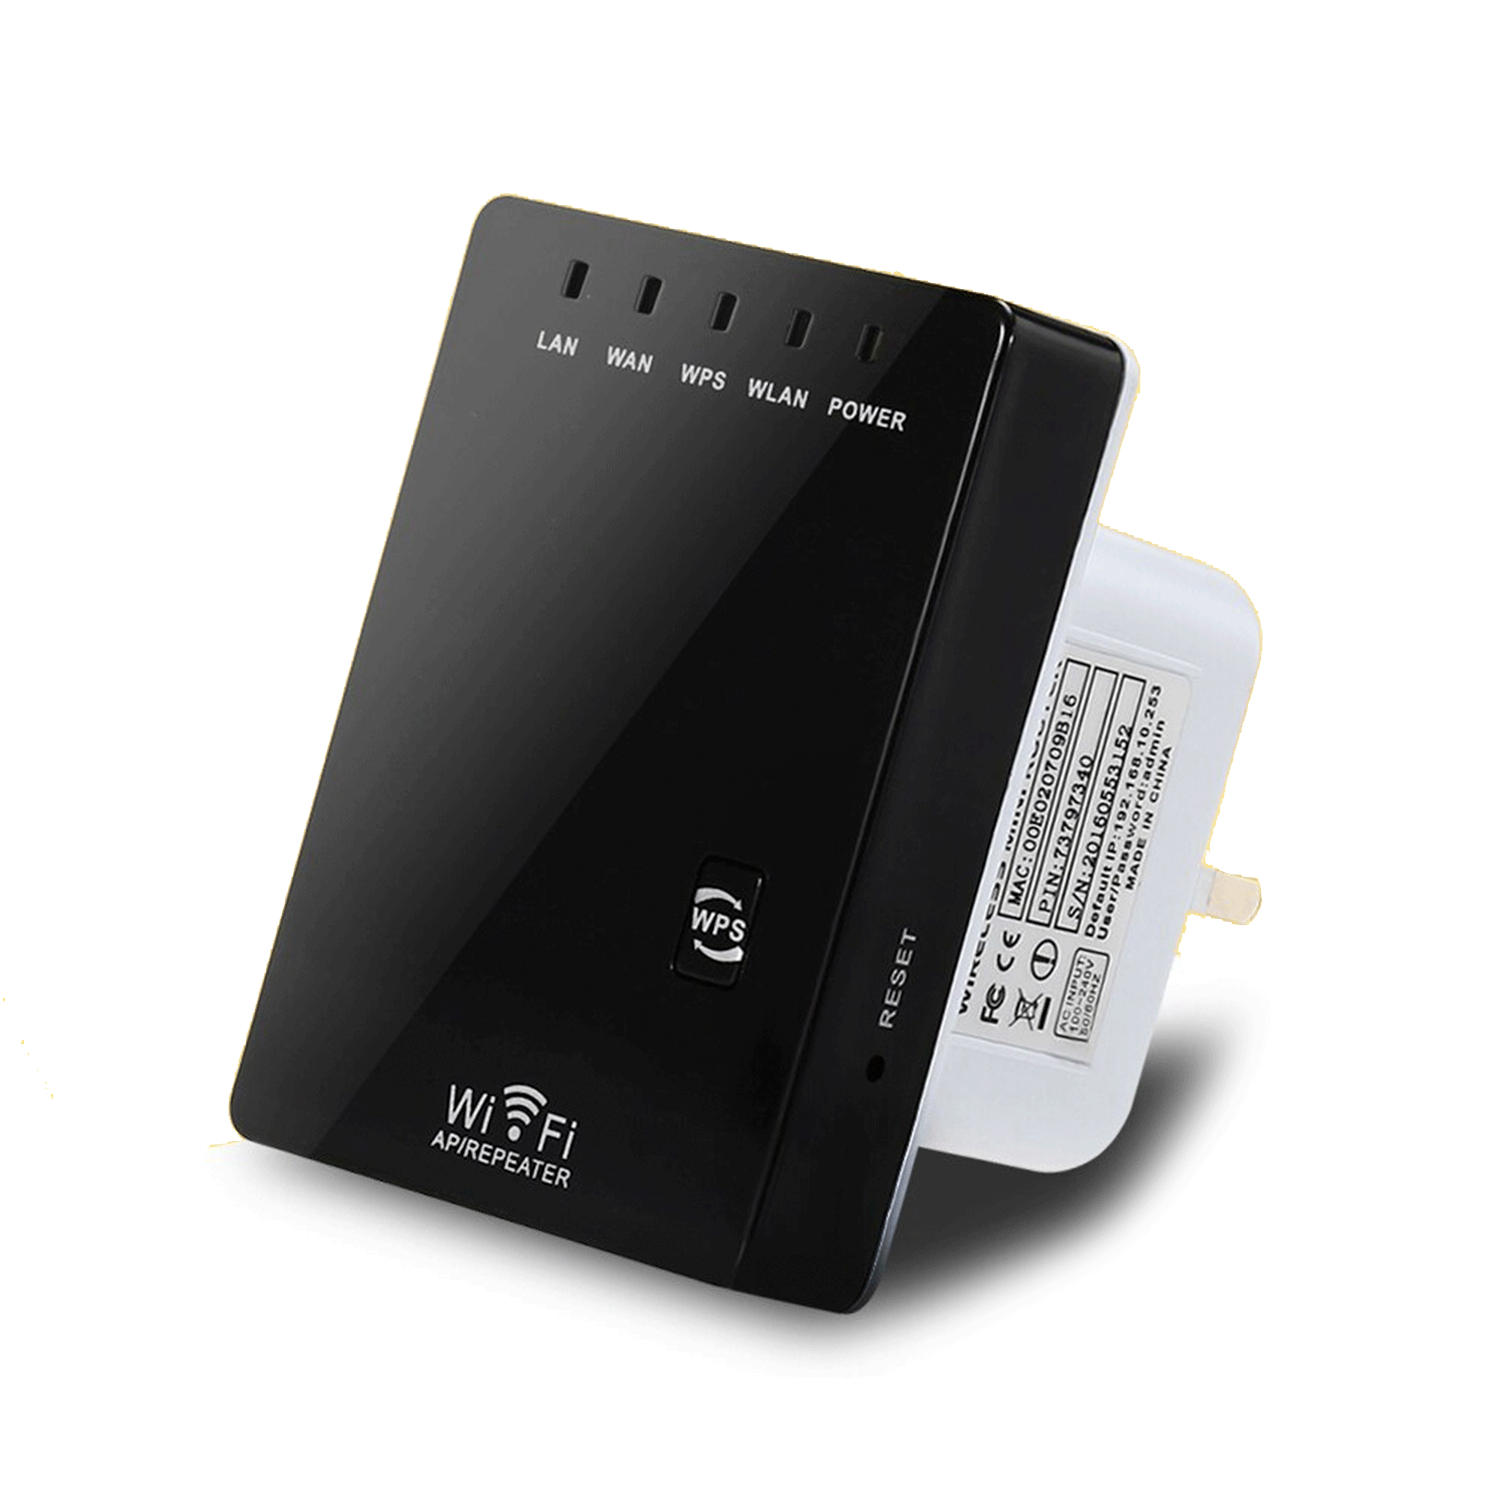 Router Wireless-N Mini Router WR02 2.4GHZ 300MBPS